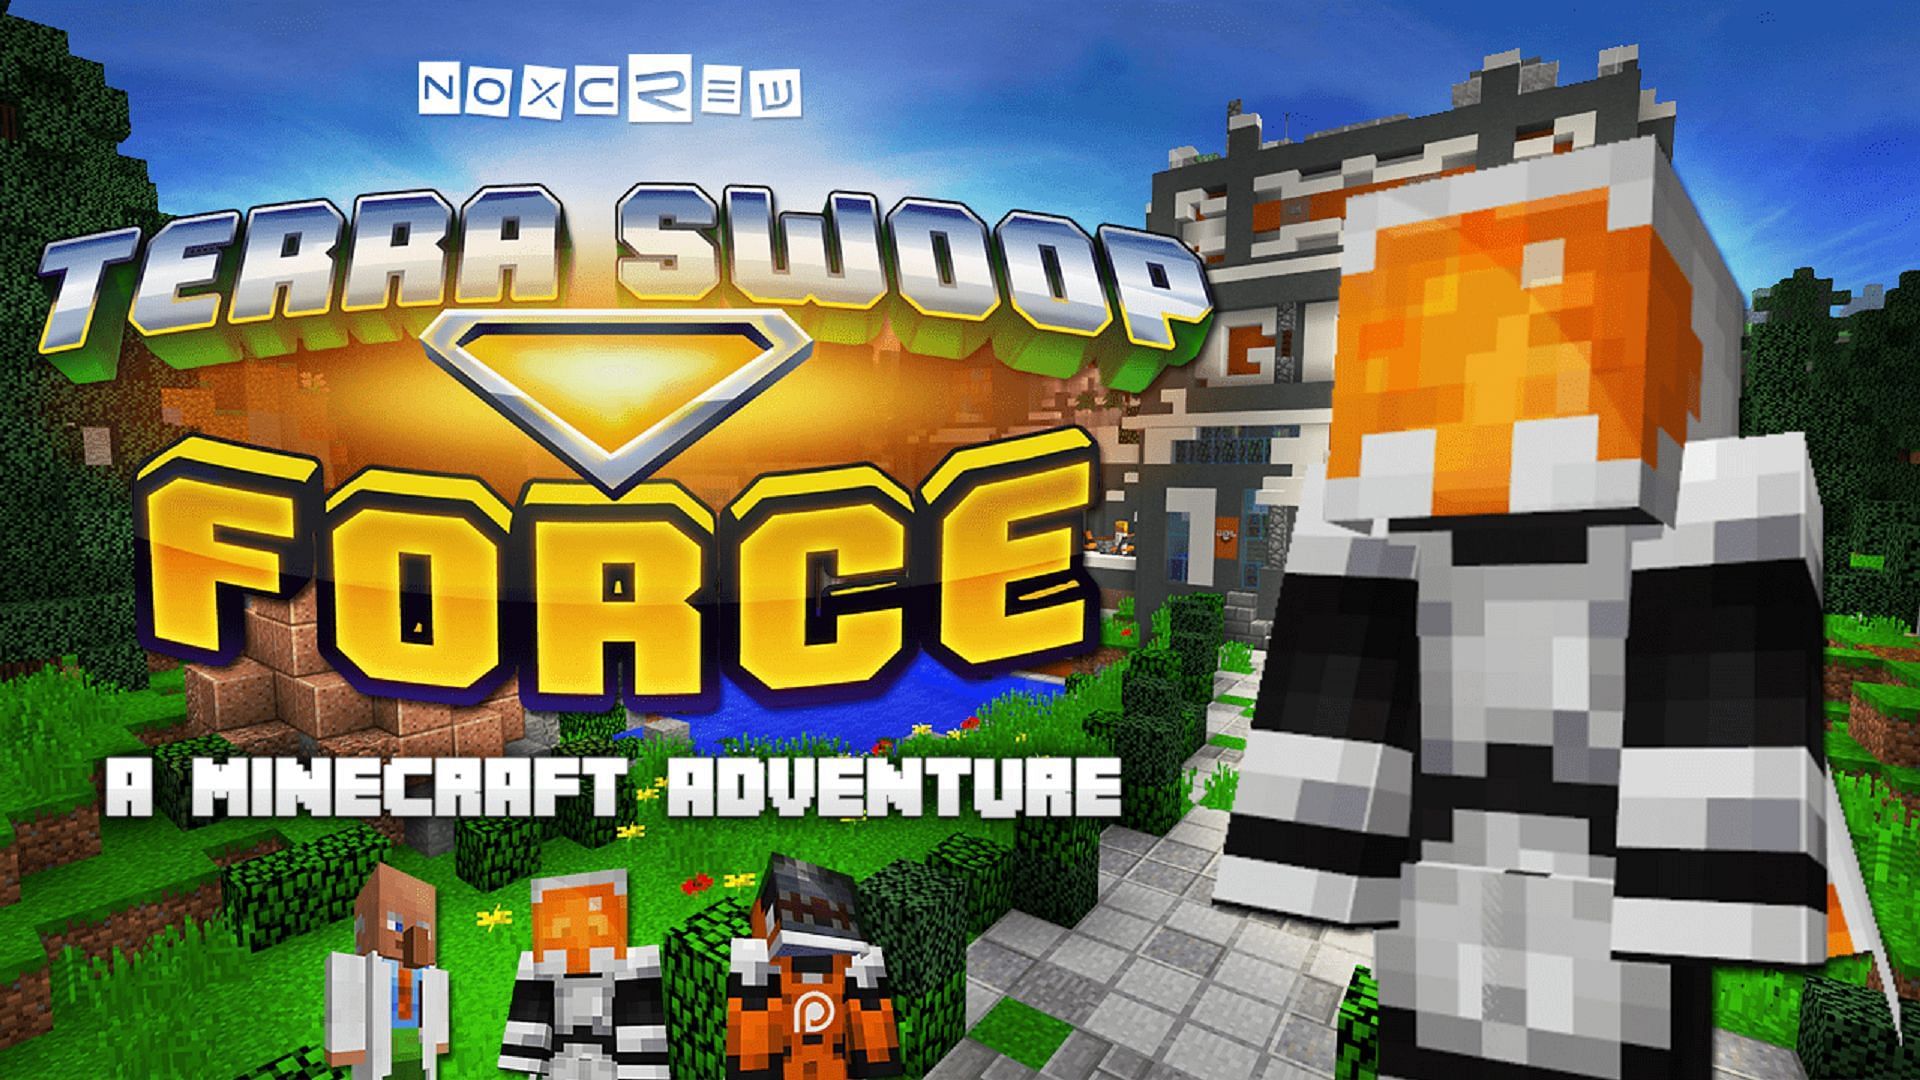 Terra Swoop Force challenges players while providing an interesting backstory (Image via Noxcrew/Minecraft Maps)